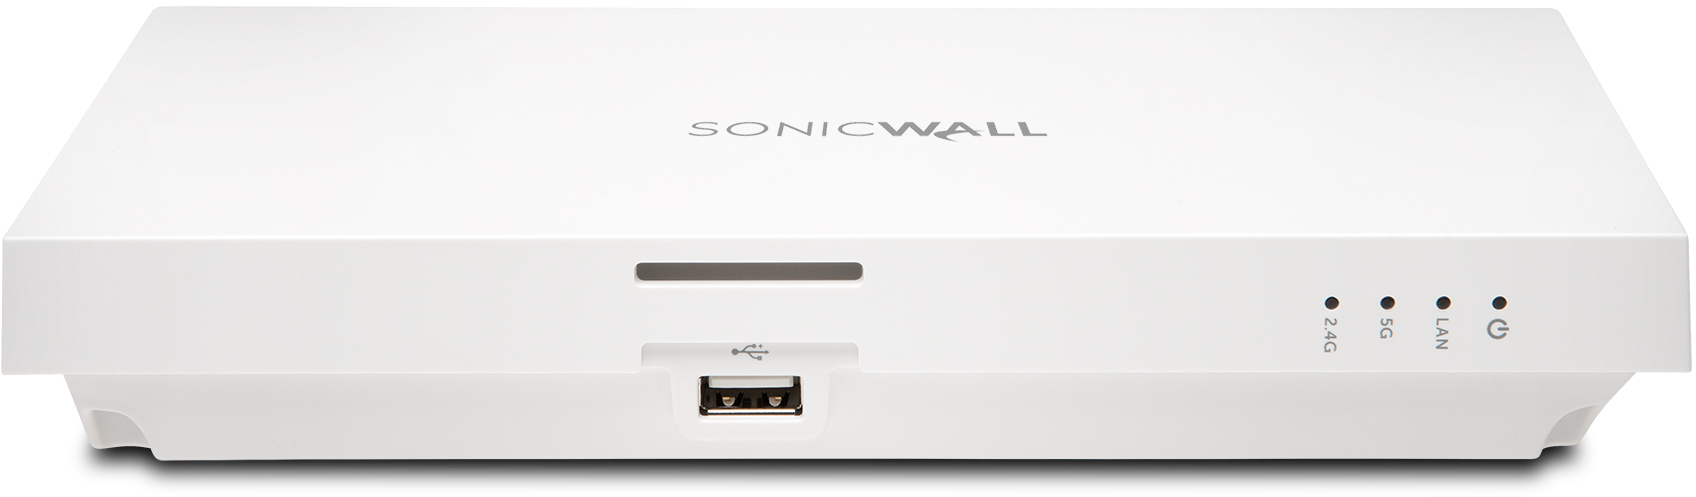 SonicWall SonicWave 231c Front